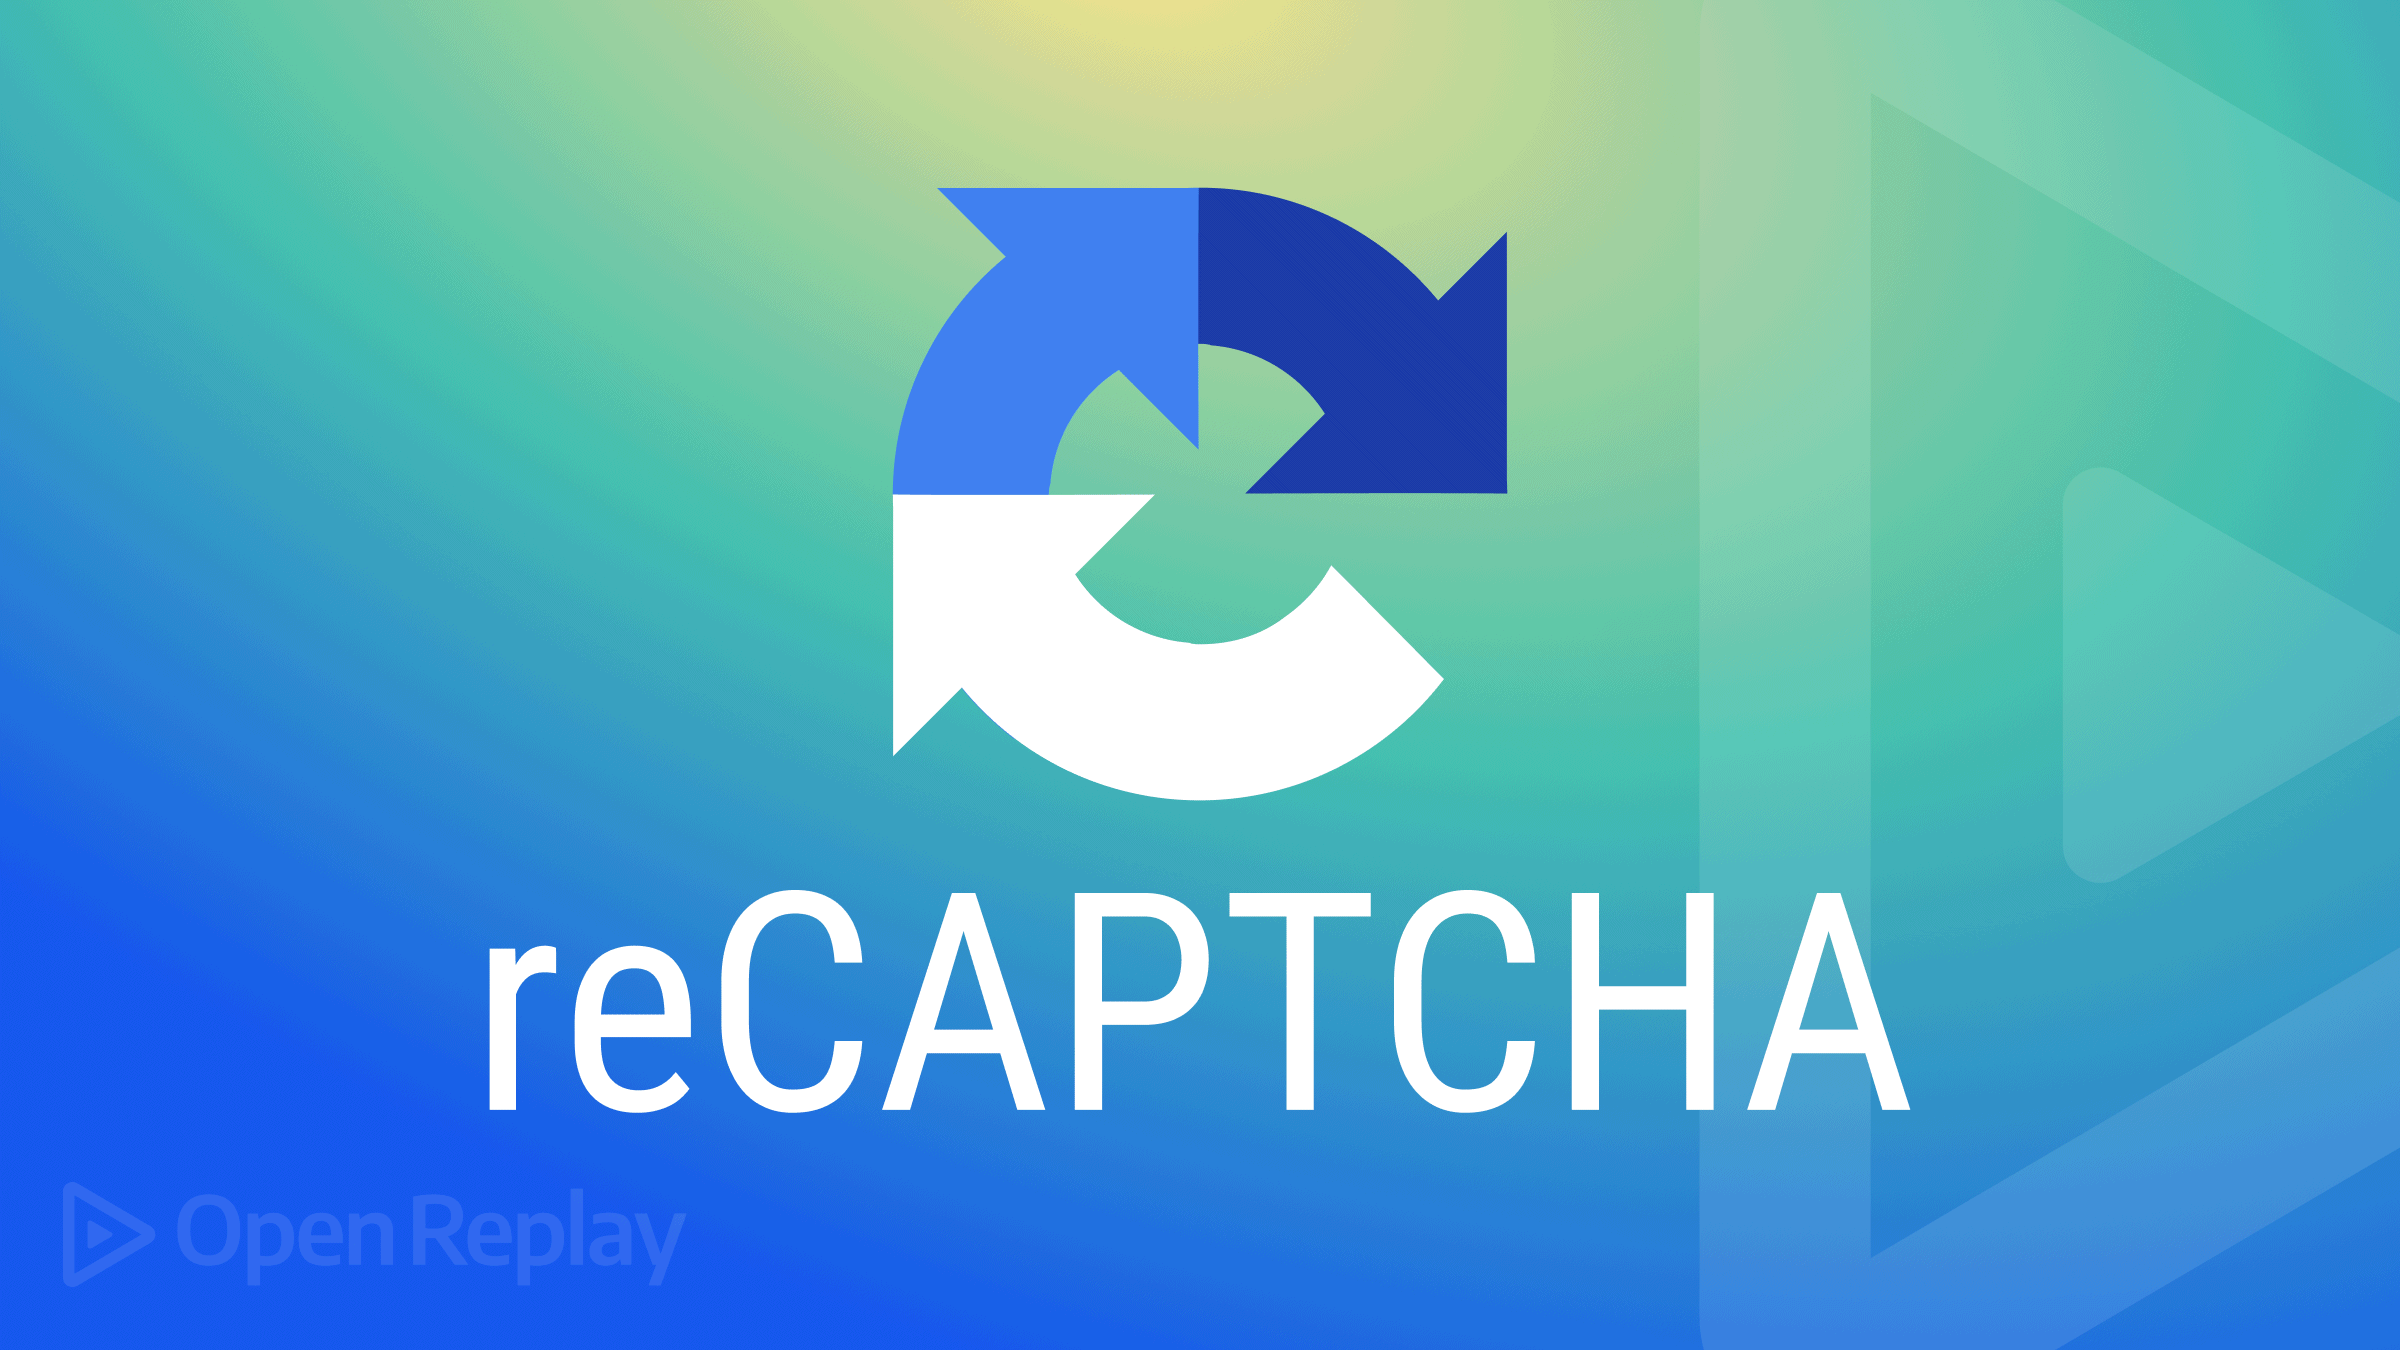 Prevent spam and detect bots with ReCAPTCHA